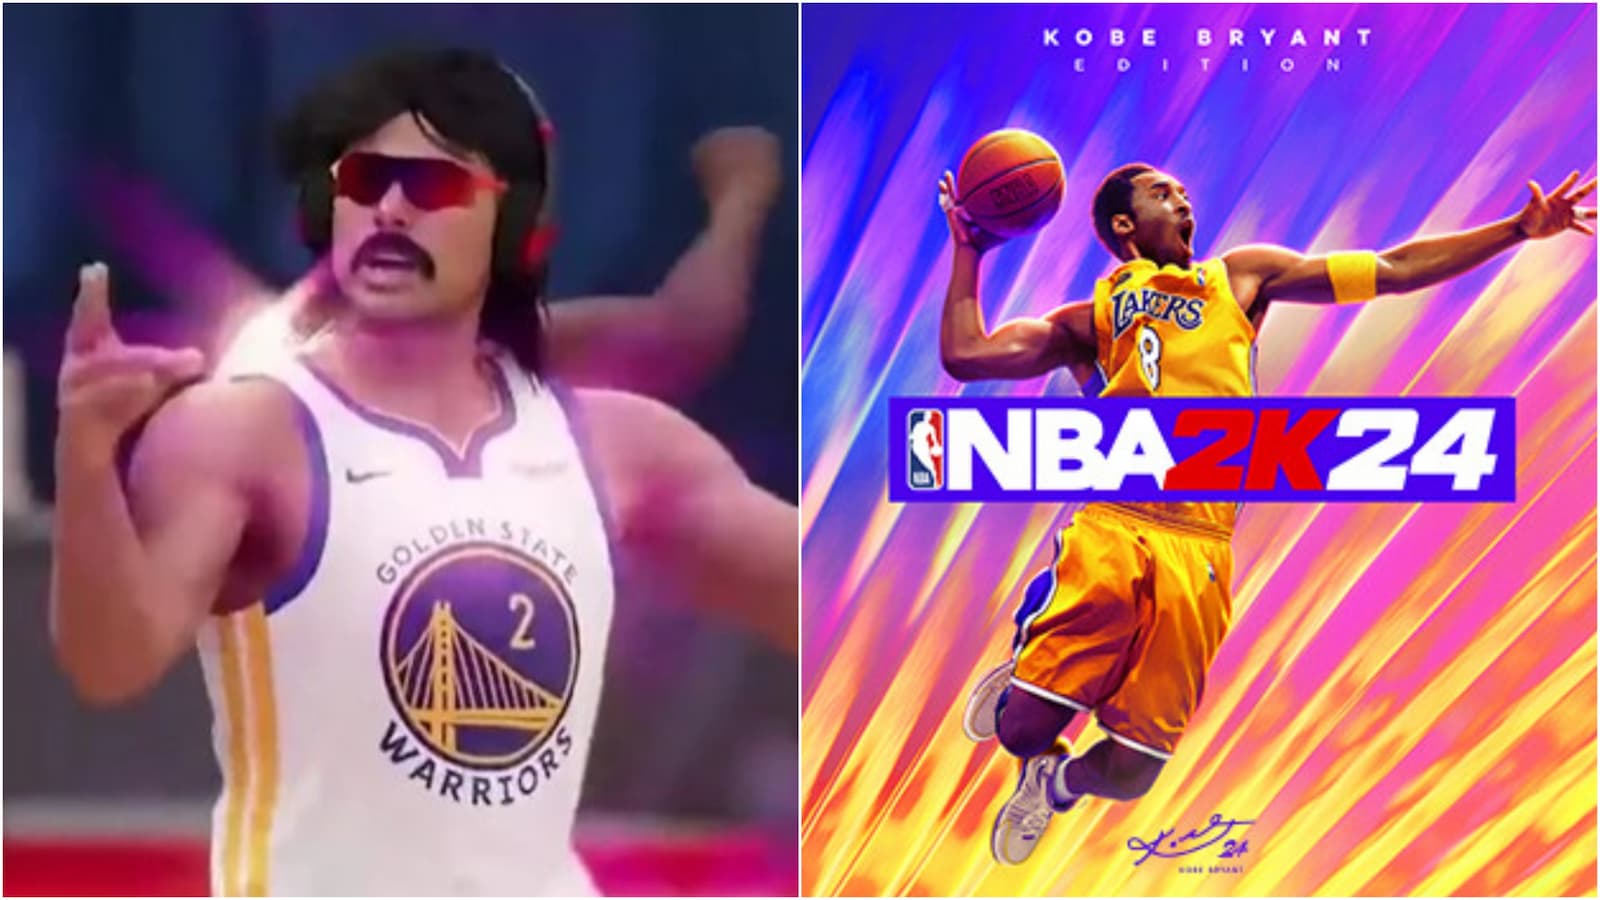 Dr Disrespect and NBA 2K24 cover